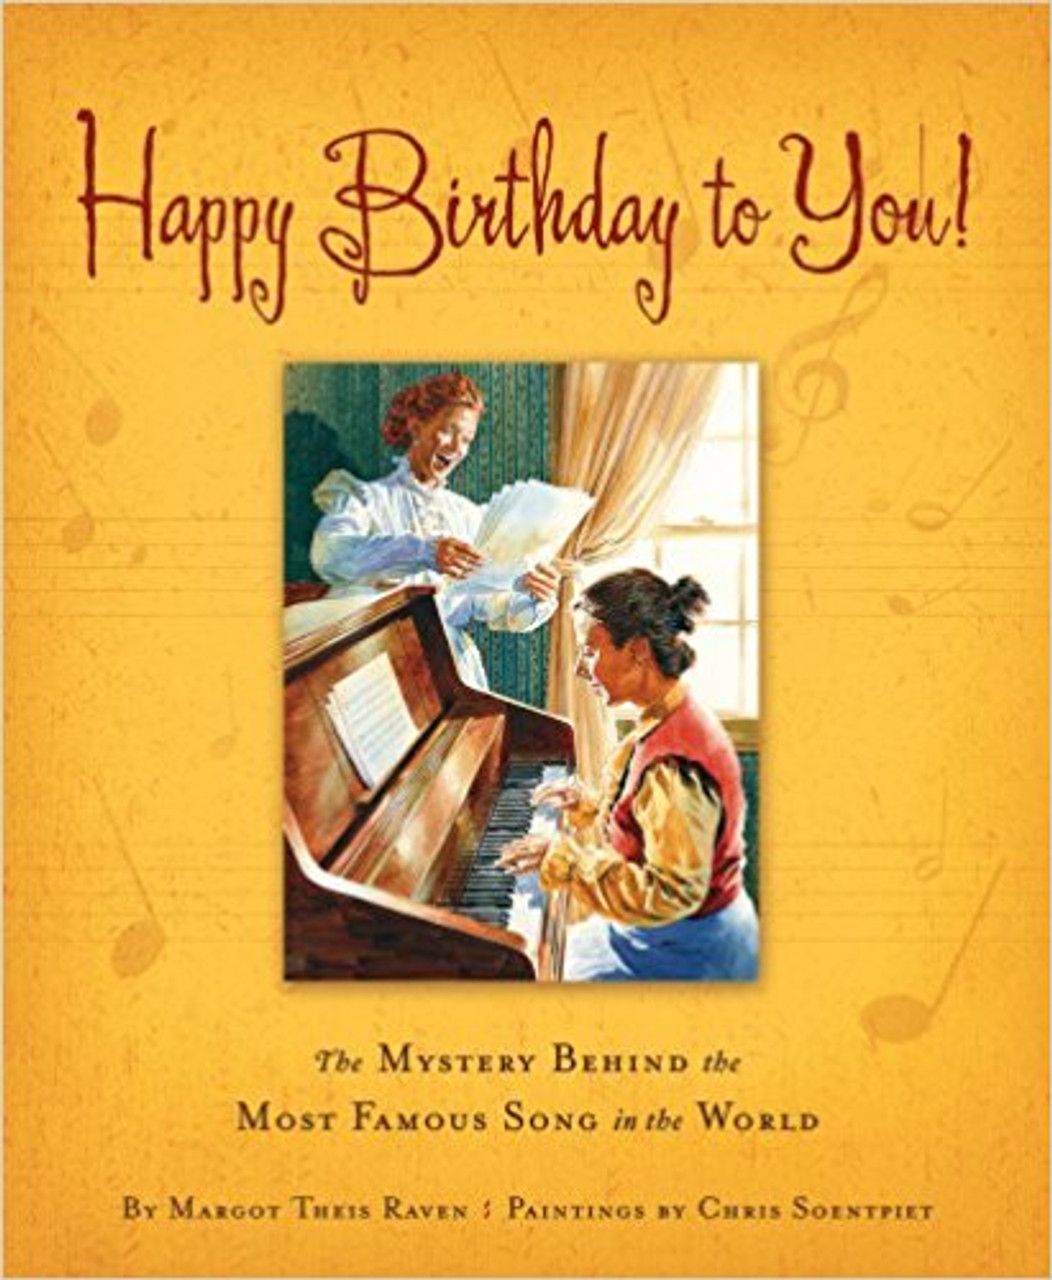 Happy Birthday to You!: The Mystery Behind the Most Famous Song in the World by Margot Theis Raven